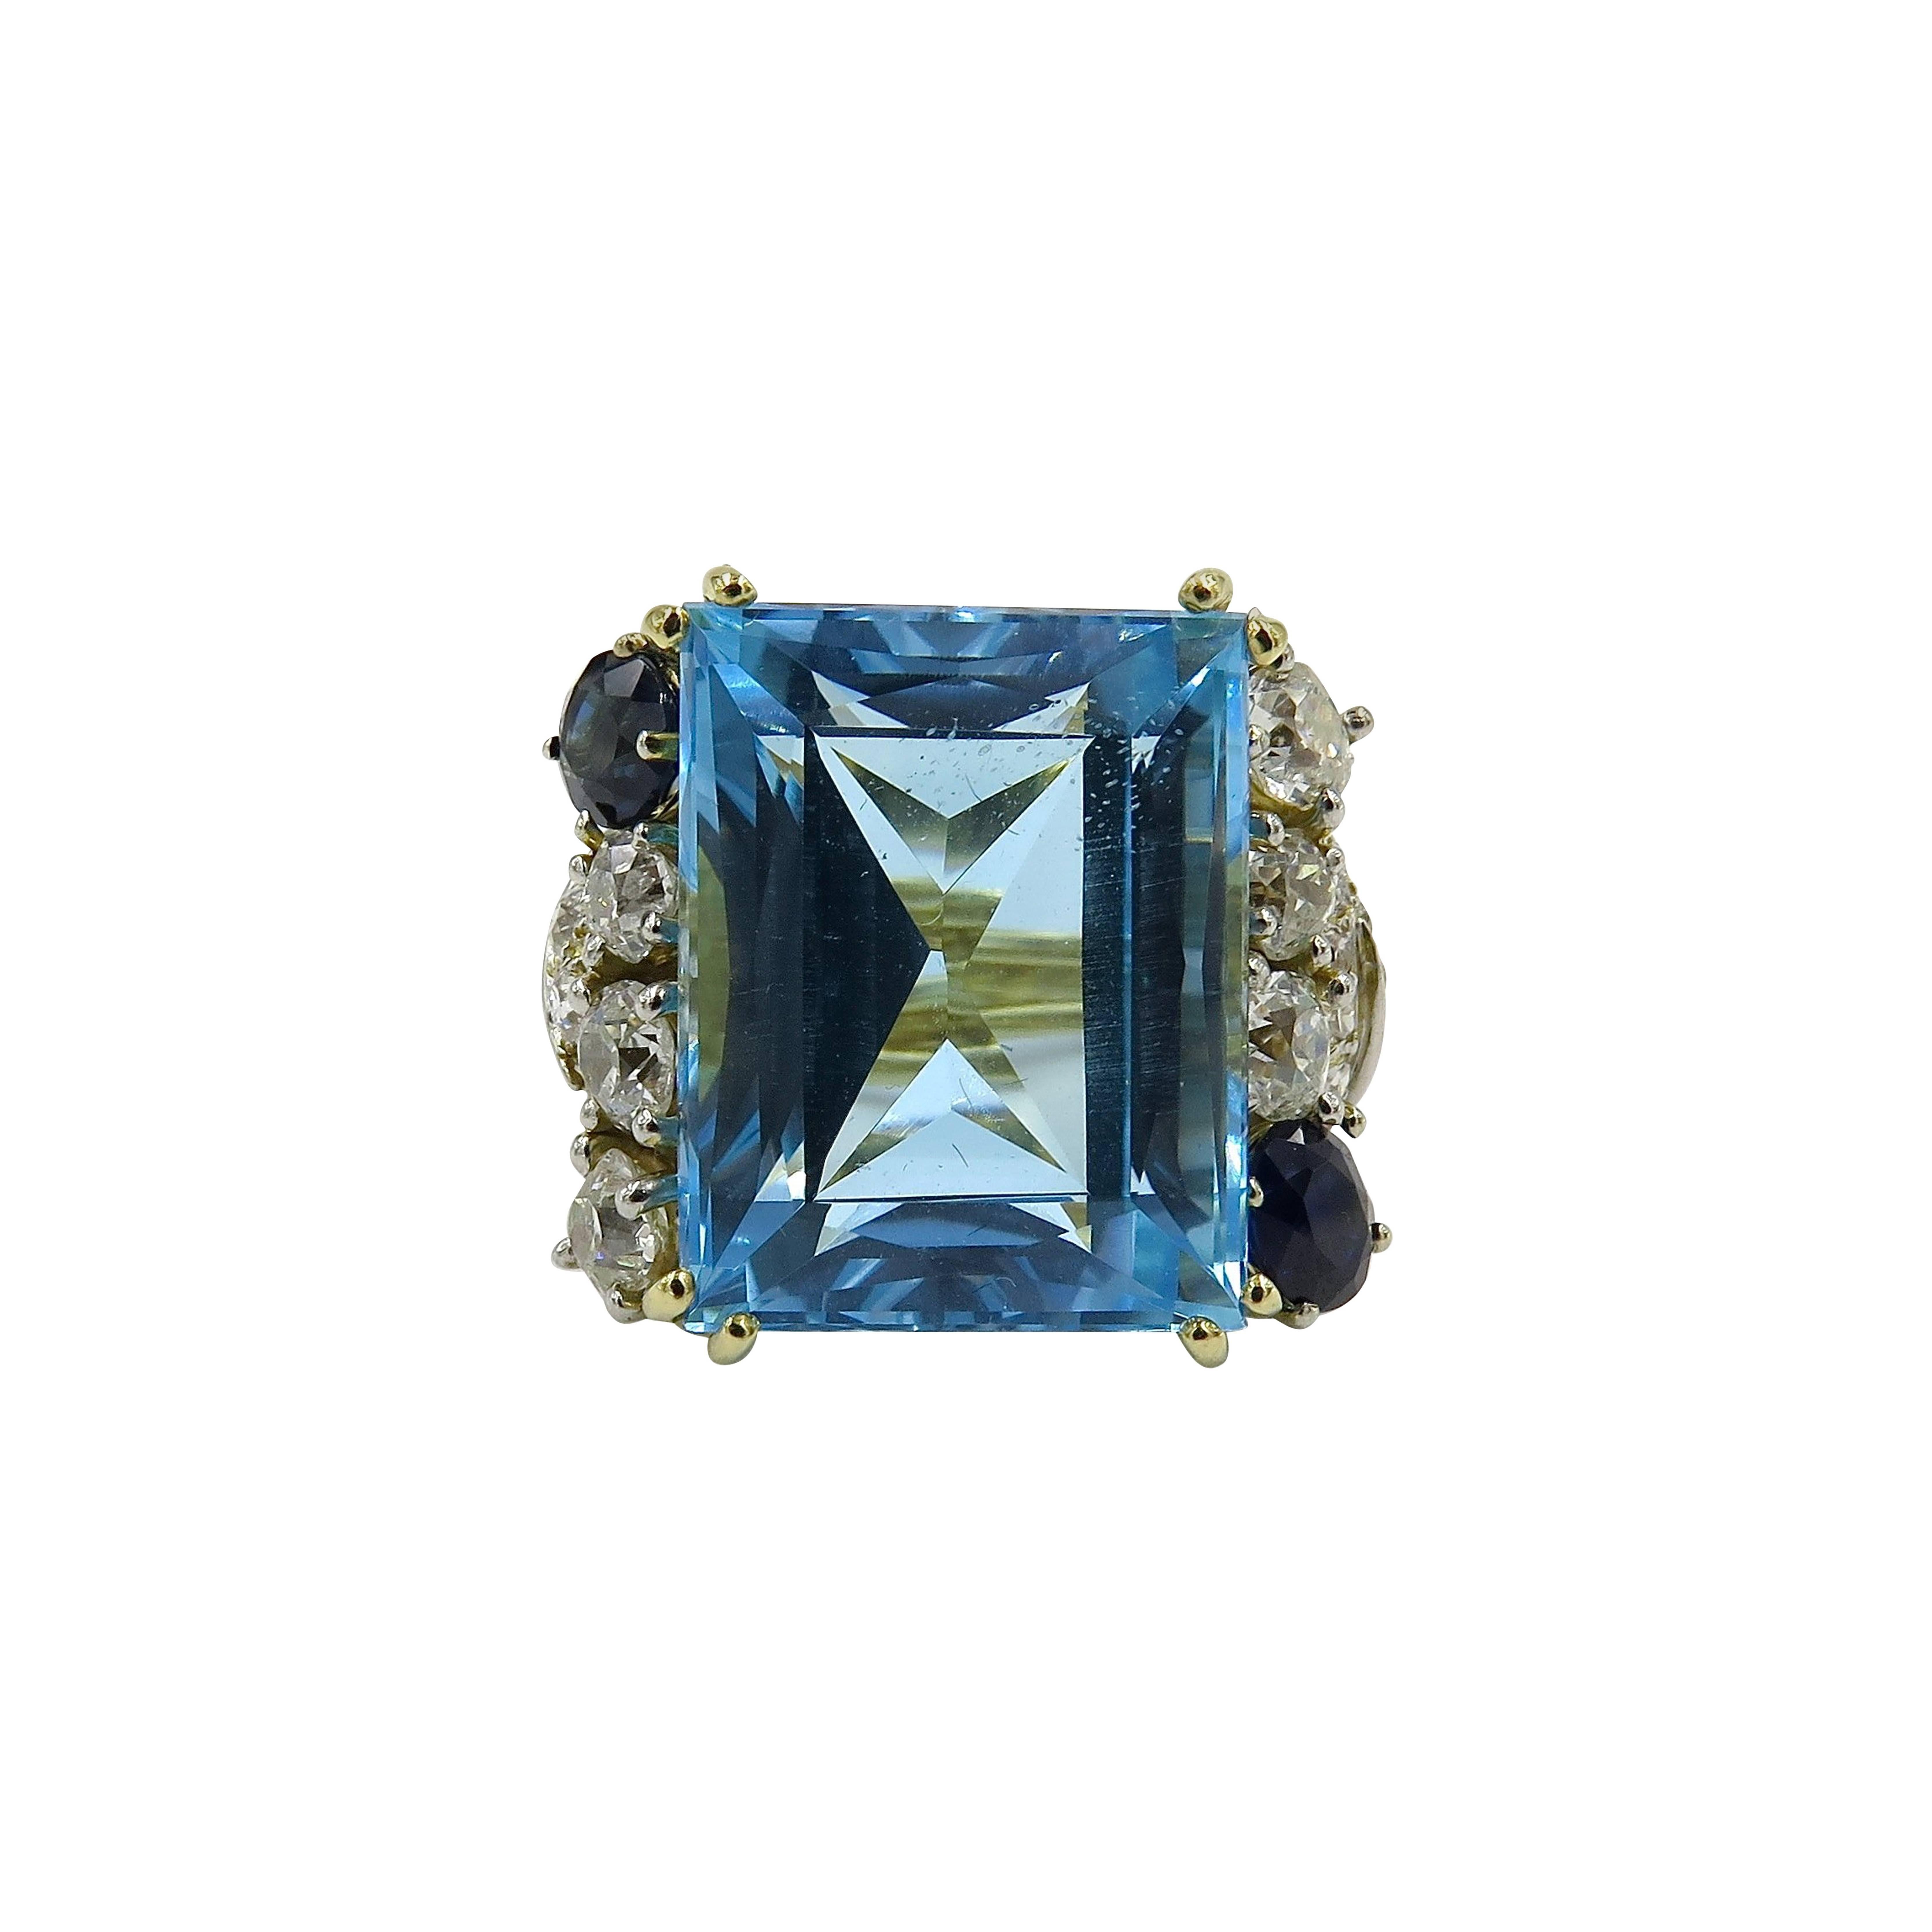 An 18 karat yellow gold, blue topaz, sapphire and diamond ring. Retailed by Milton Schepps. Set with a rectangular cut aquamarine, weighing 32.91 carats, enhanced by with old European cut diamond and sapphire accents pave shoulders, further enhanced